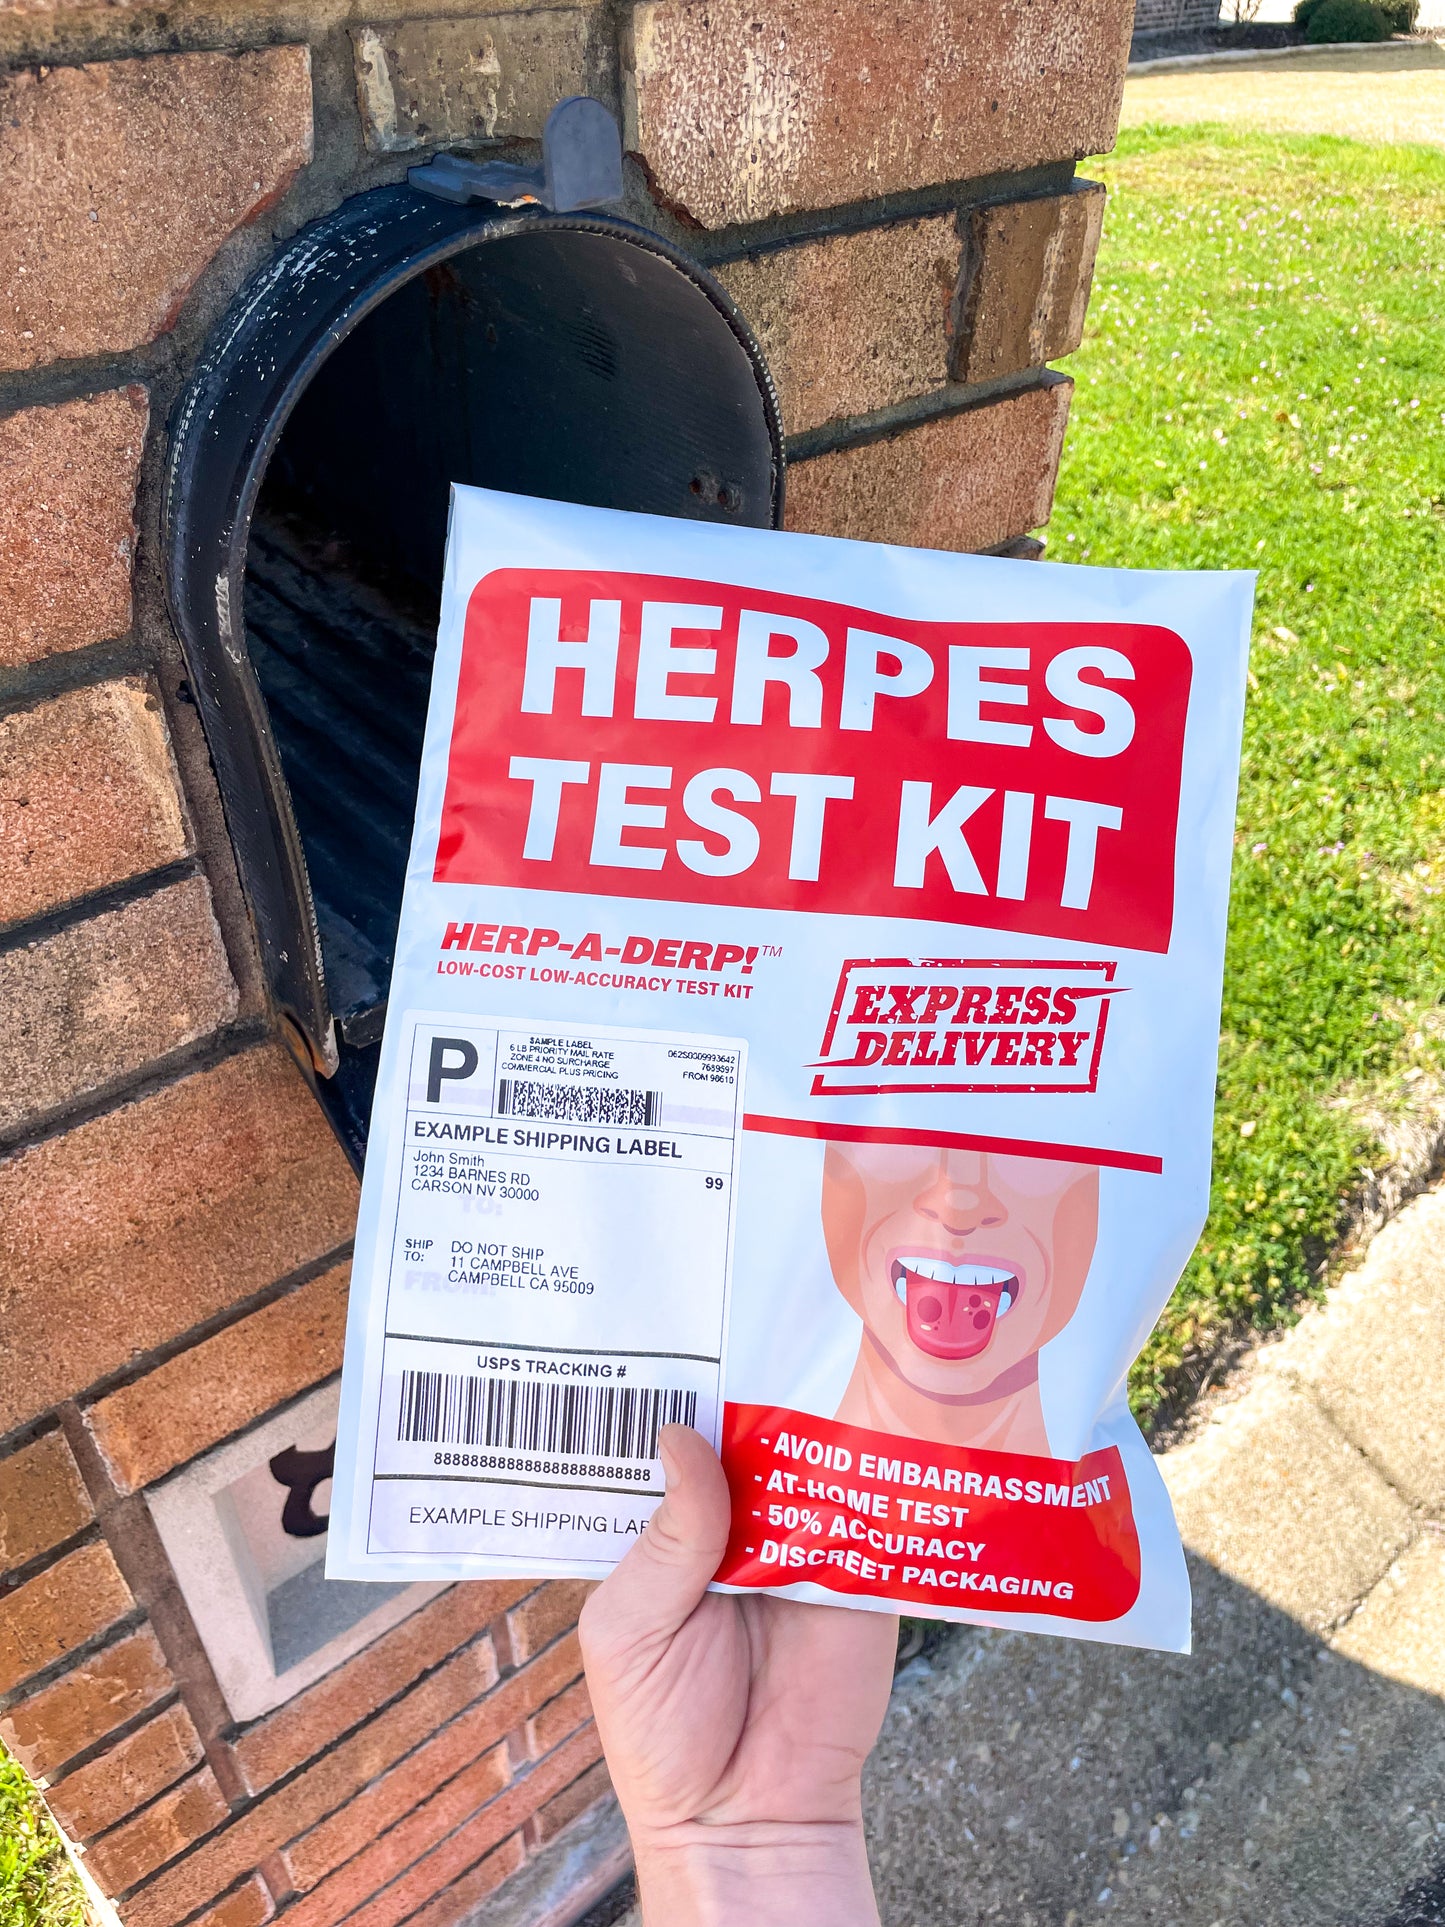 POV of someone being pranked! They open their mailbox to find an embarrassing "low-cost low- accuracy herpes test kit" package has been rush ordered to them.